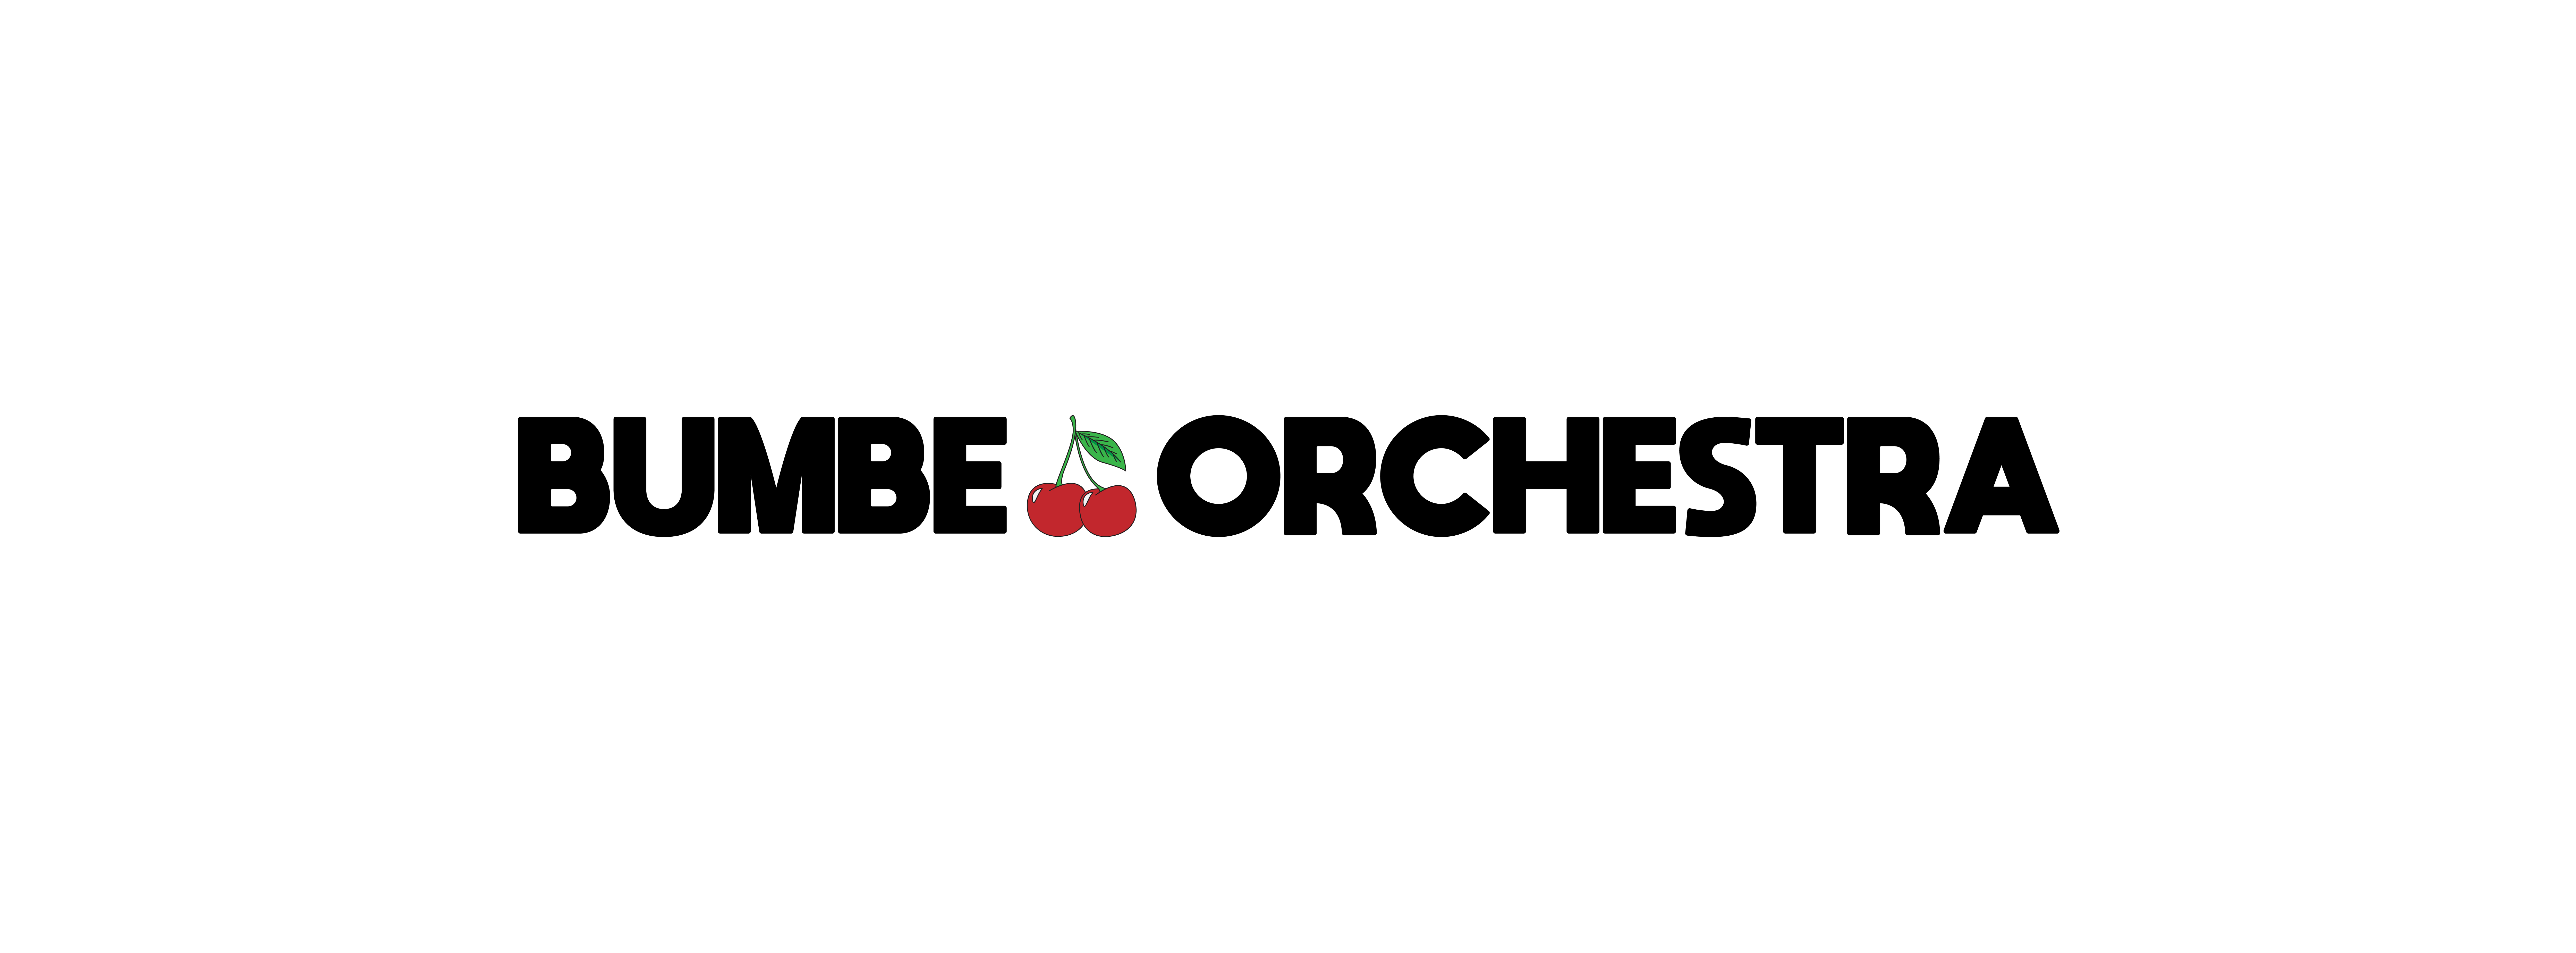 BUMBE ORCHESTRA